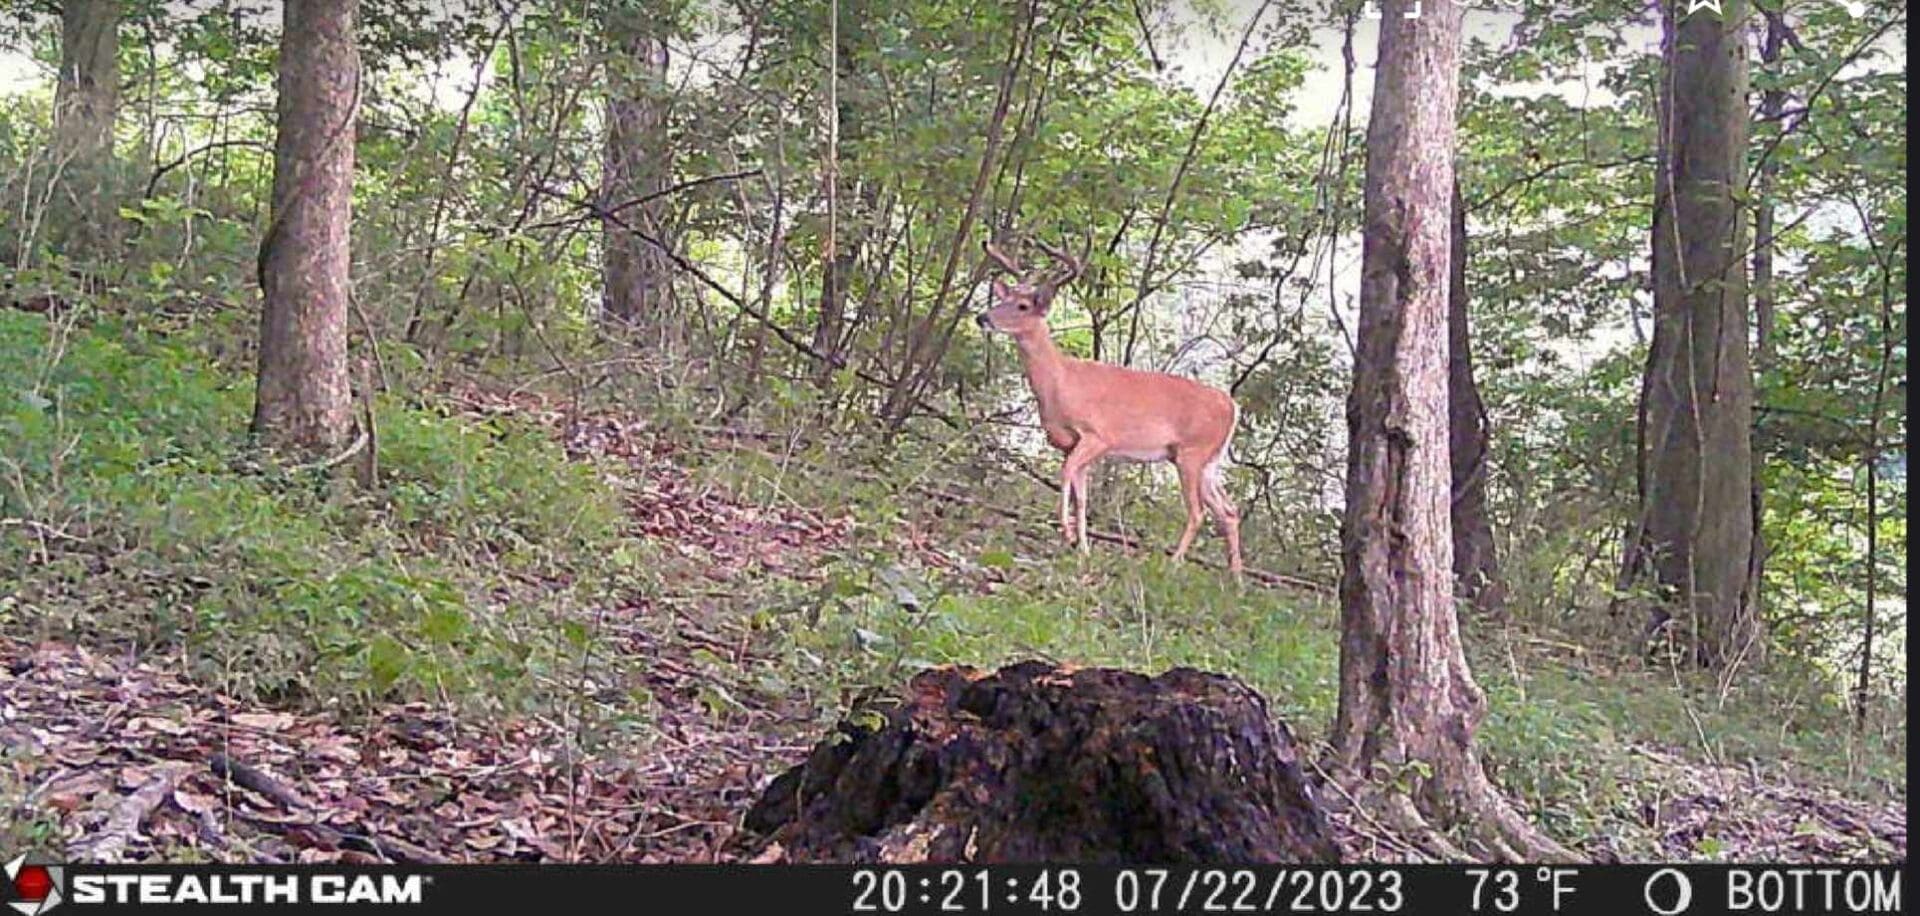 A deer is standing in the woods near some trees.